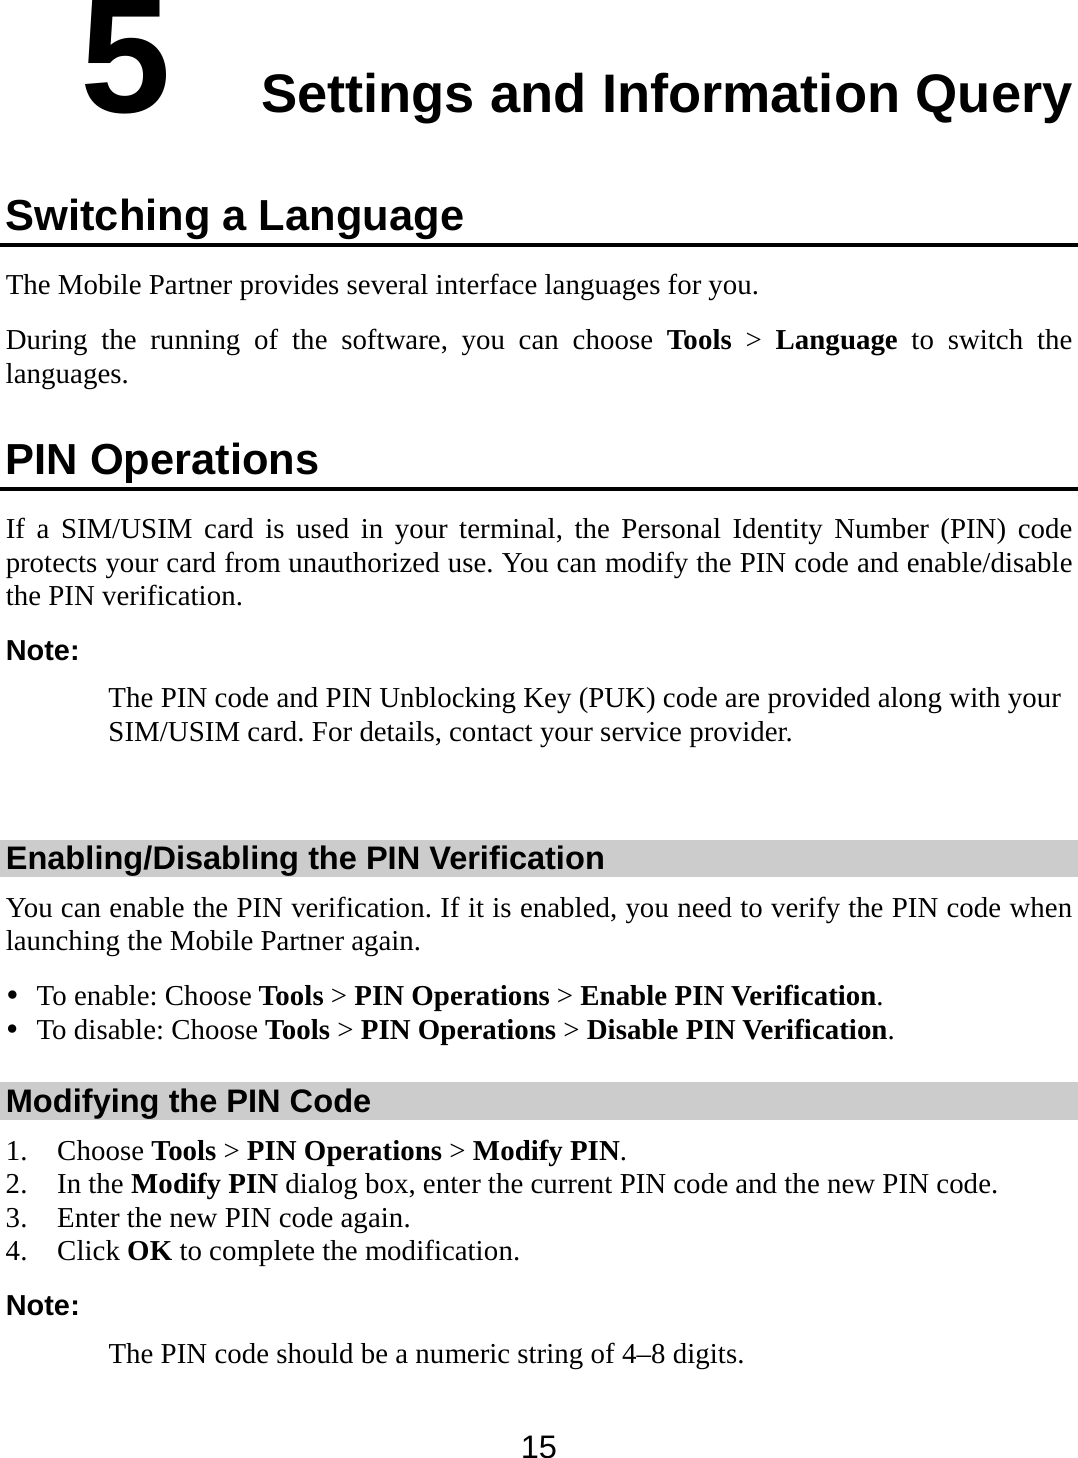  15 5  Settings and Information Query Switching a Language The Mobile Partner provides several interface languages for you. During the running of the software, you can choose Tools &gt; Language to switch the languages. PIN Operations If a SIM/USIM card is used in your terminal, the Personal Identity Number (PIN) code protects your card from unauthorized use. You can modify the PIN code and enable/disable the PIN verification. Note: The PIN code and PIN Unblocking Key (PUK) code are provided along with your SIM/USIM card. For details, contact your service provider.  Enabling/Disabling the PIN Verification You can enable the PIN verification. If it is enabled, you need to verify the PIN code when launching the Mobile Partner again.  To enable: Choose Tools &gt; PIN Operations &gt; Enable PIN Verification.  To disable: Choose Tools &gt; PIN Operations &gt; Disable PIN Verification. Modifying the PIN Code 1. Choose Tools &gt; PIN Operations &gt; Modify PIN. 2. In the Modify PIN dialog box, enter the current PIN code and the new PIN code. 3. Enter the new PIN code again. 4. Click OK to complete the modification. Note: The PIN code should be a numeric string of 4–8 digits. 